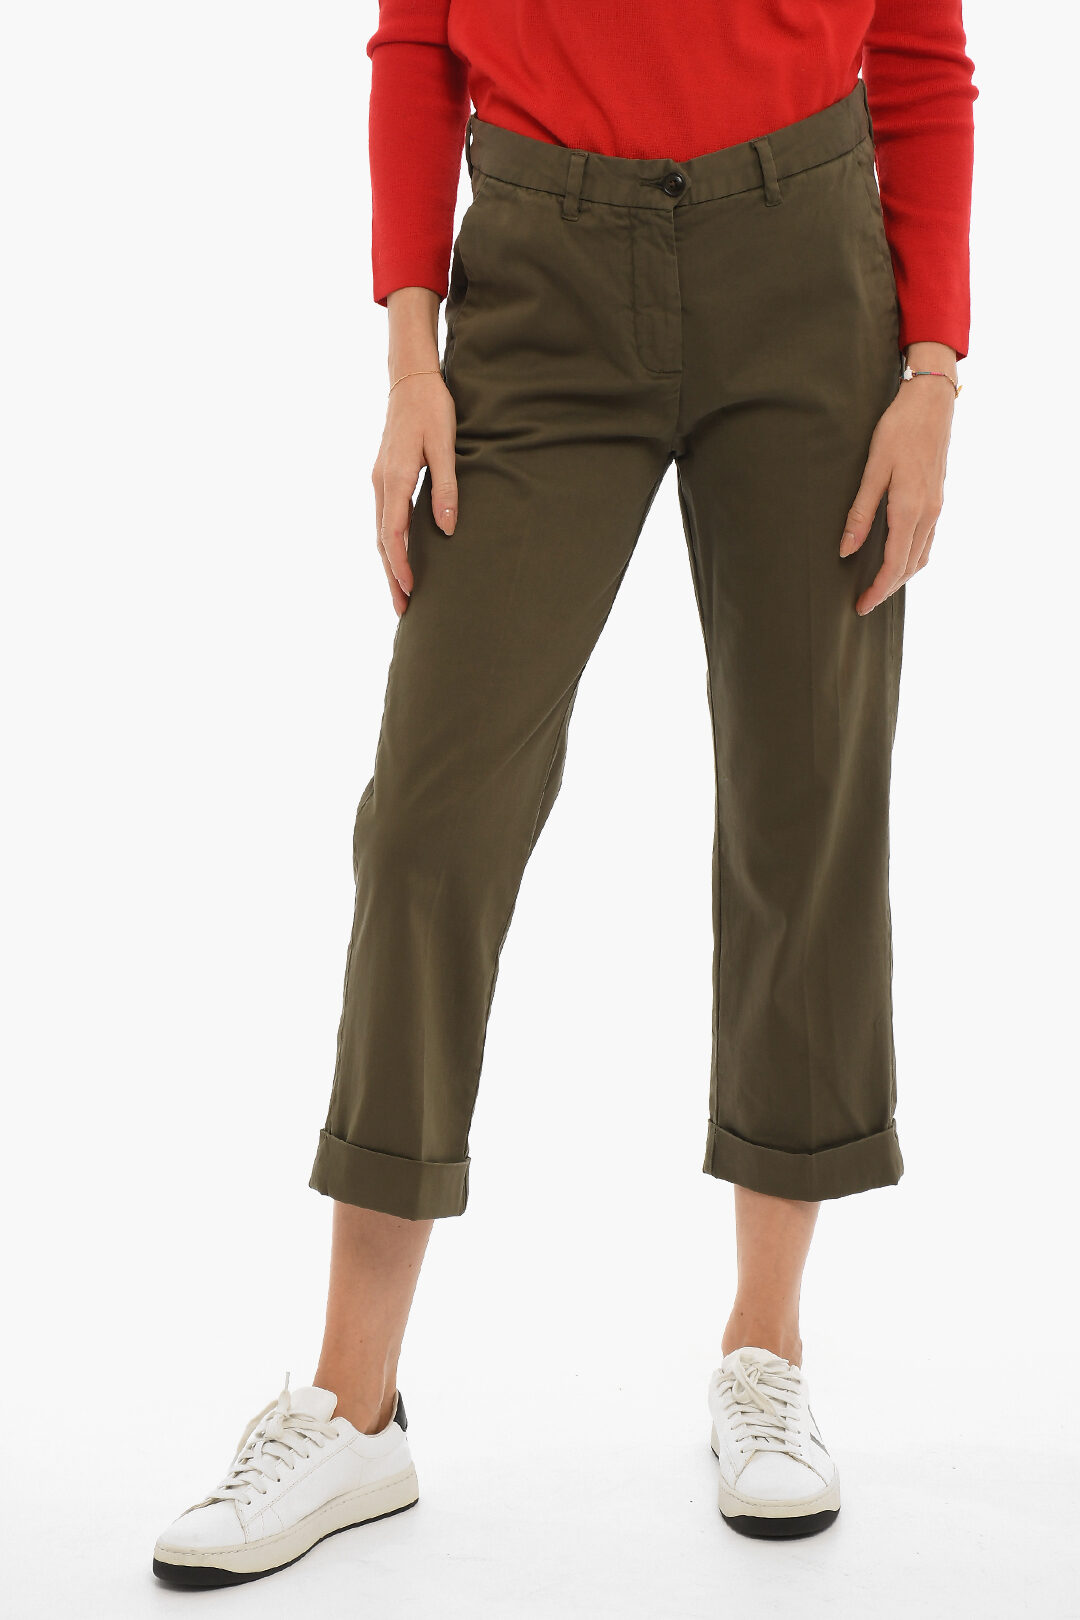 https://data.glamood.com/imgprodotto/cotton-stretch-american-pants-with-belt-loops_1386352_zoom.jpg